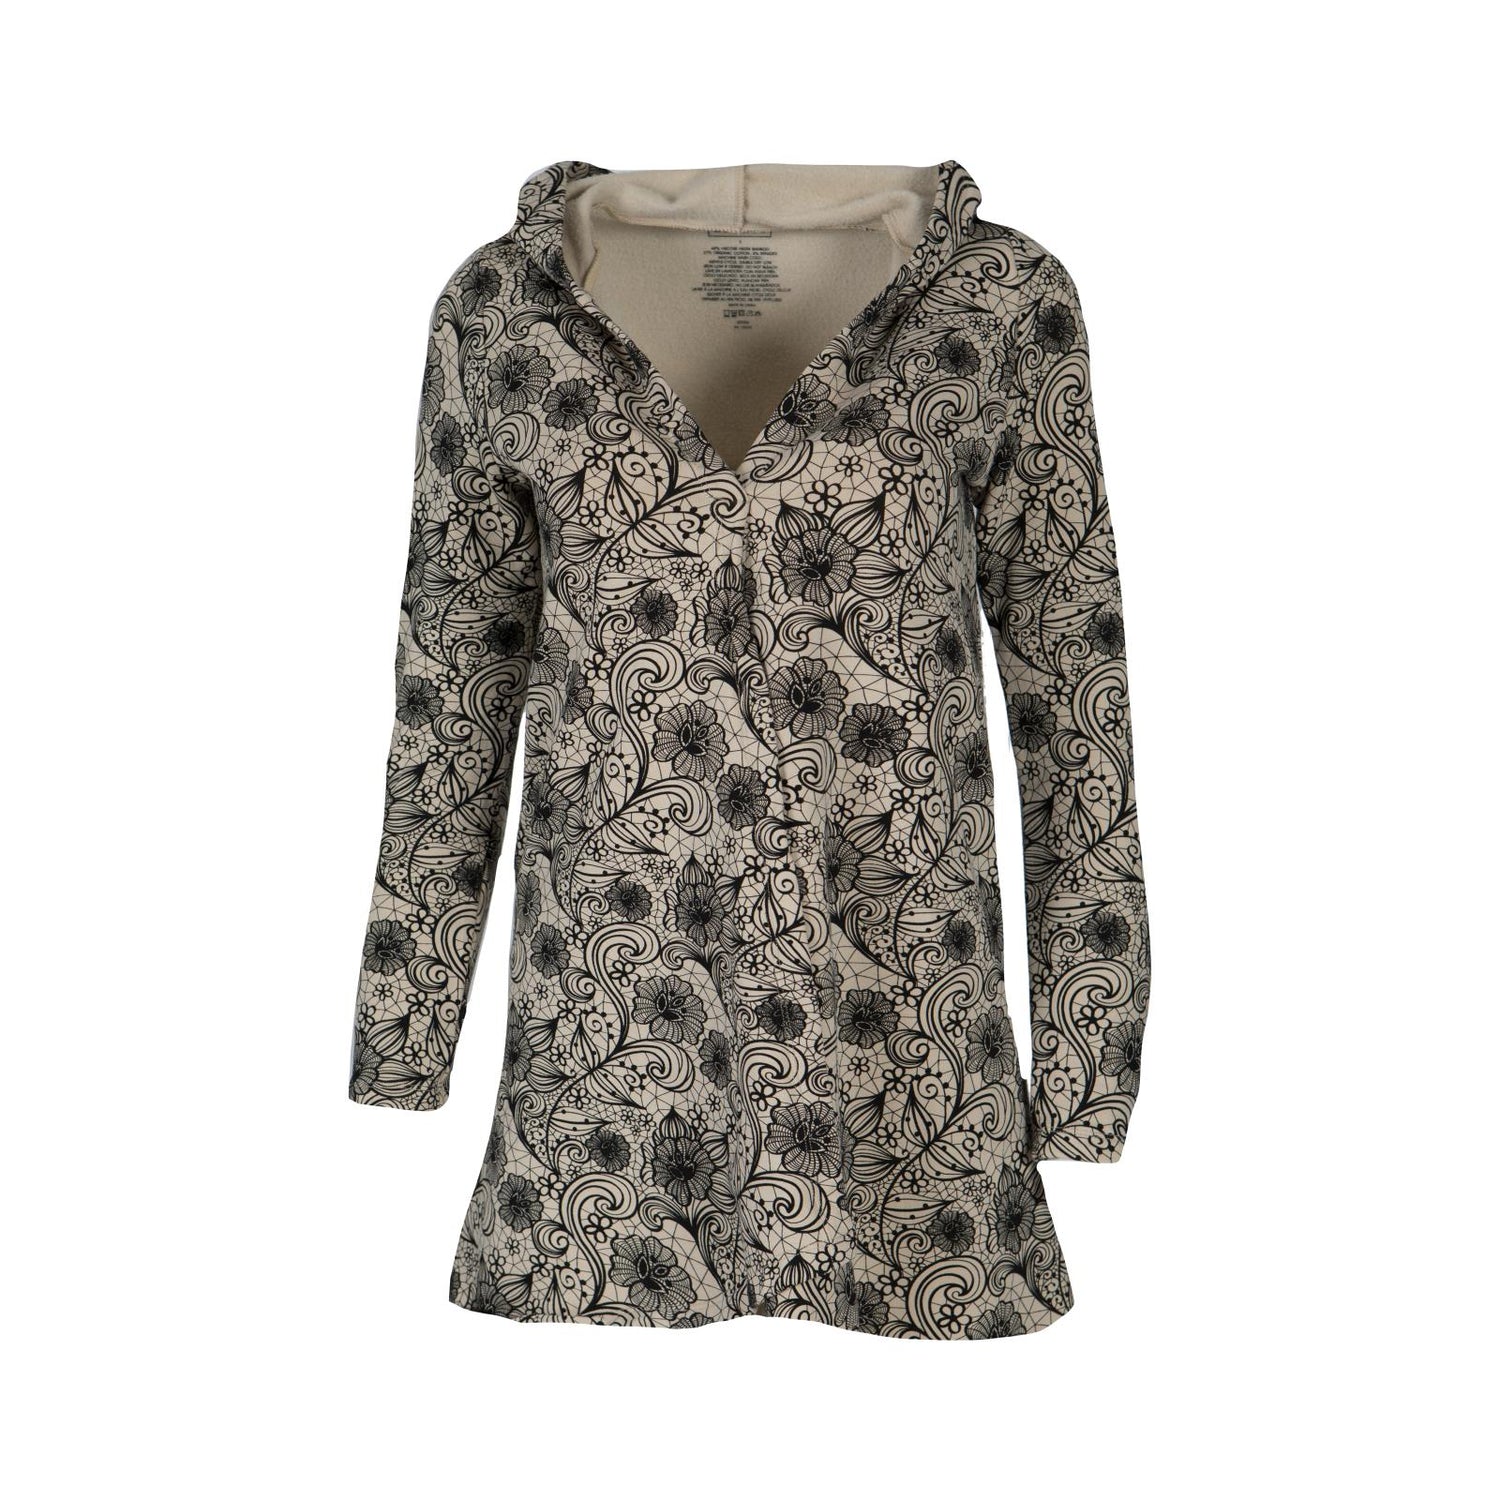 Women's Print Fleece Hooded Cardigan with Pockets in Burlap Lace